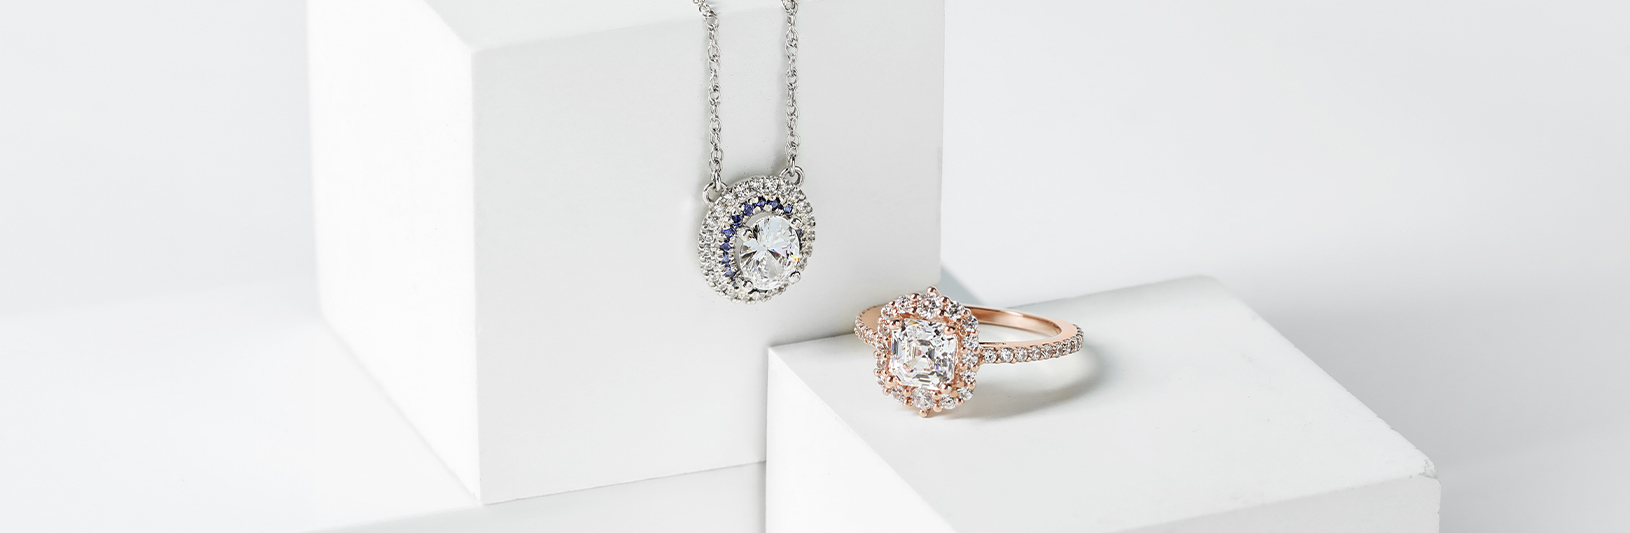 A necklace and engagement ring with vintage design elements